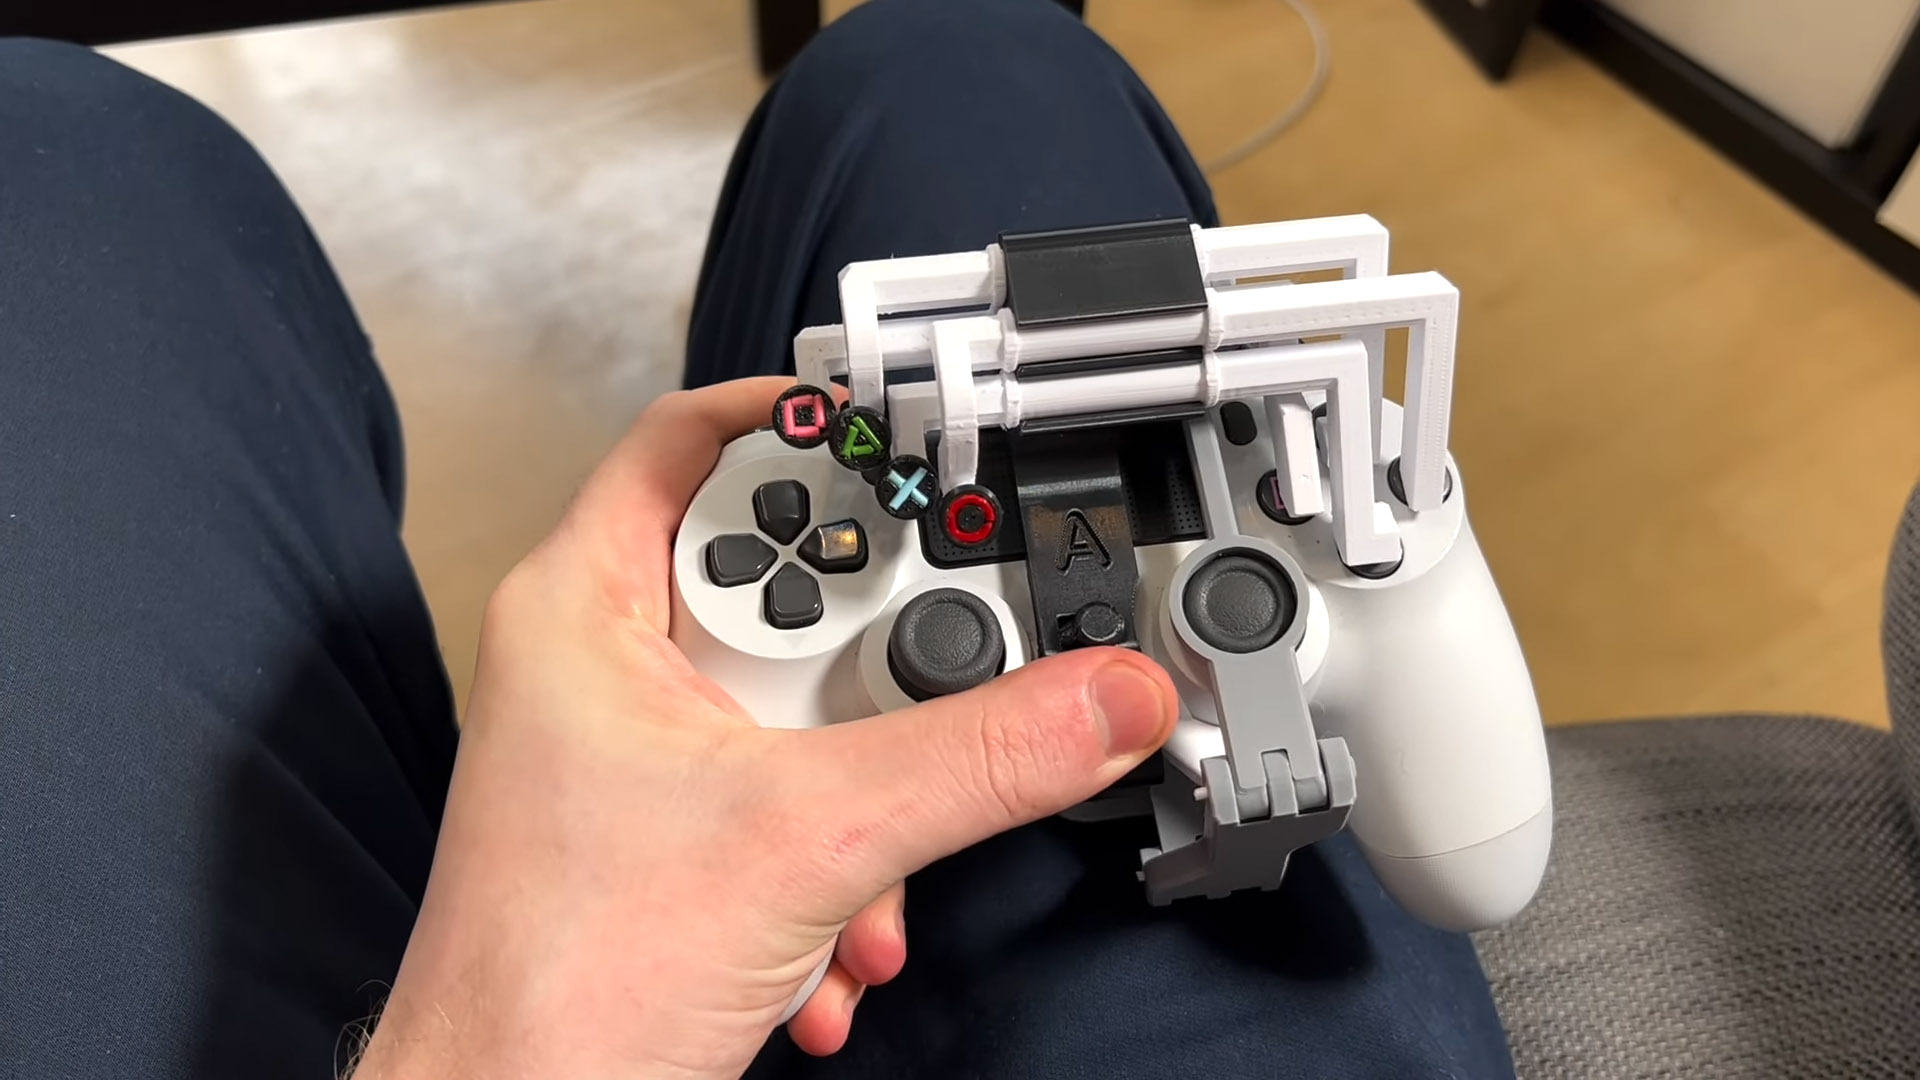 3D-printed controller mod allows one-handed and PS5 gaming - NotebookCheck.net News